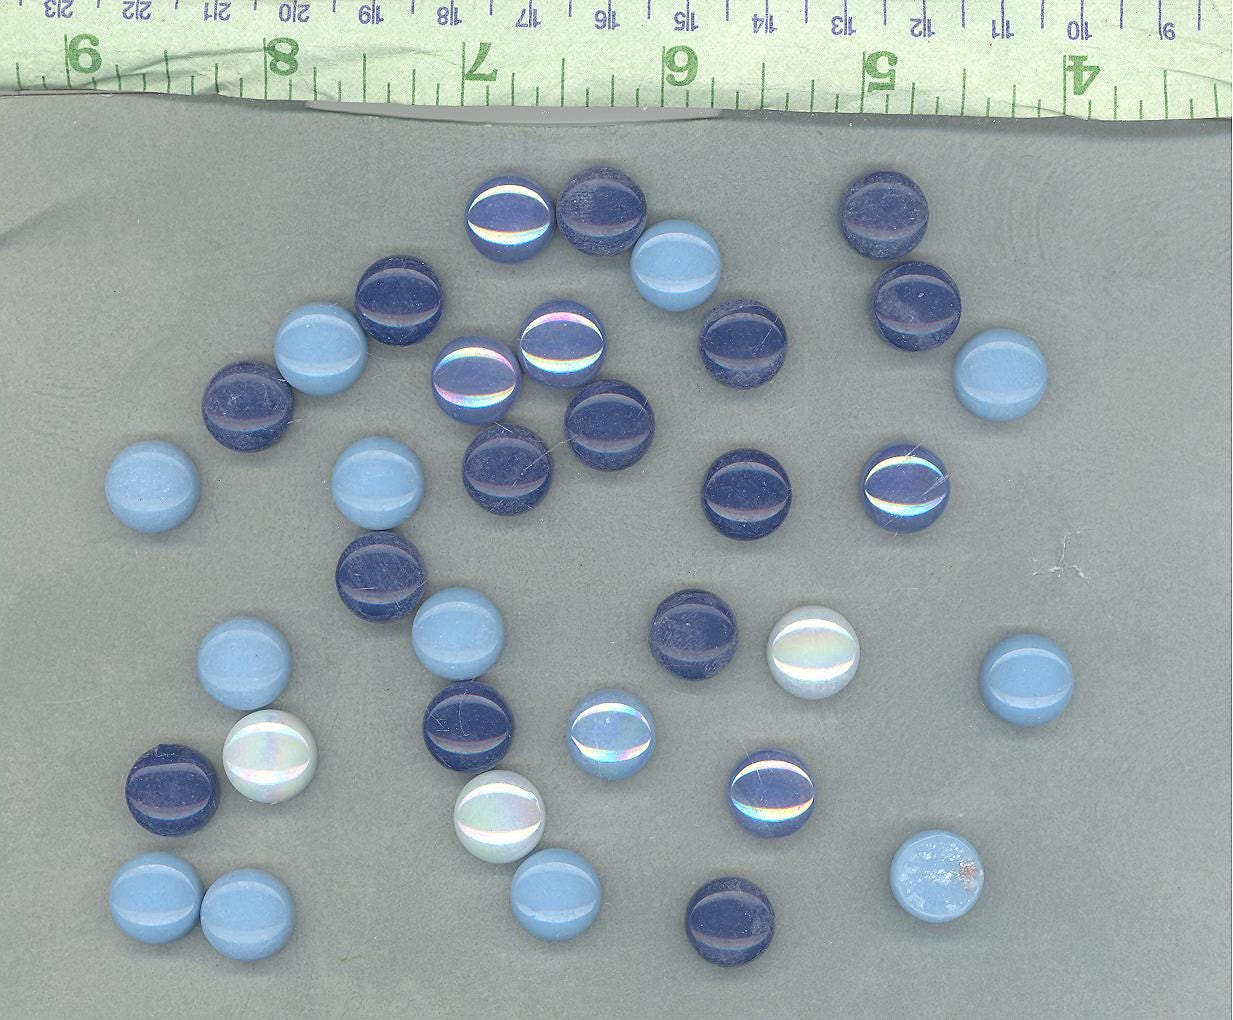 Got the Blues Mix Glass Drops Mosaic Tiles - 100 grams Vase Fillers - Mix of Gloss and Iridescent 12mm Glass Gems - Over 60 Tiles